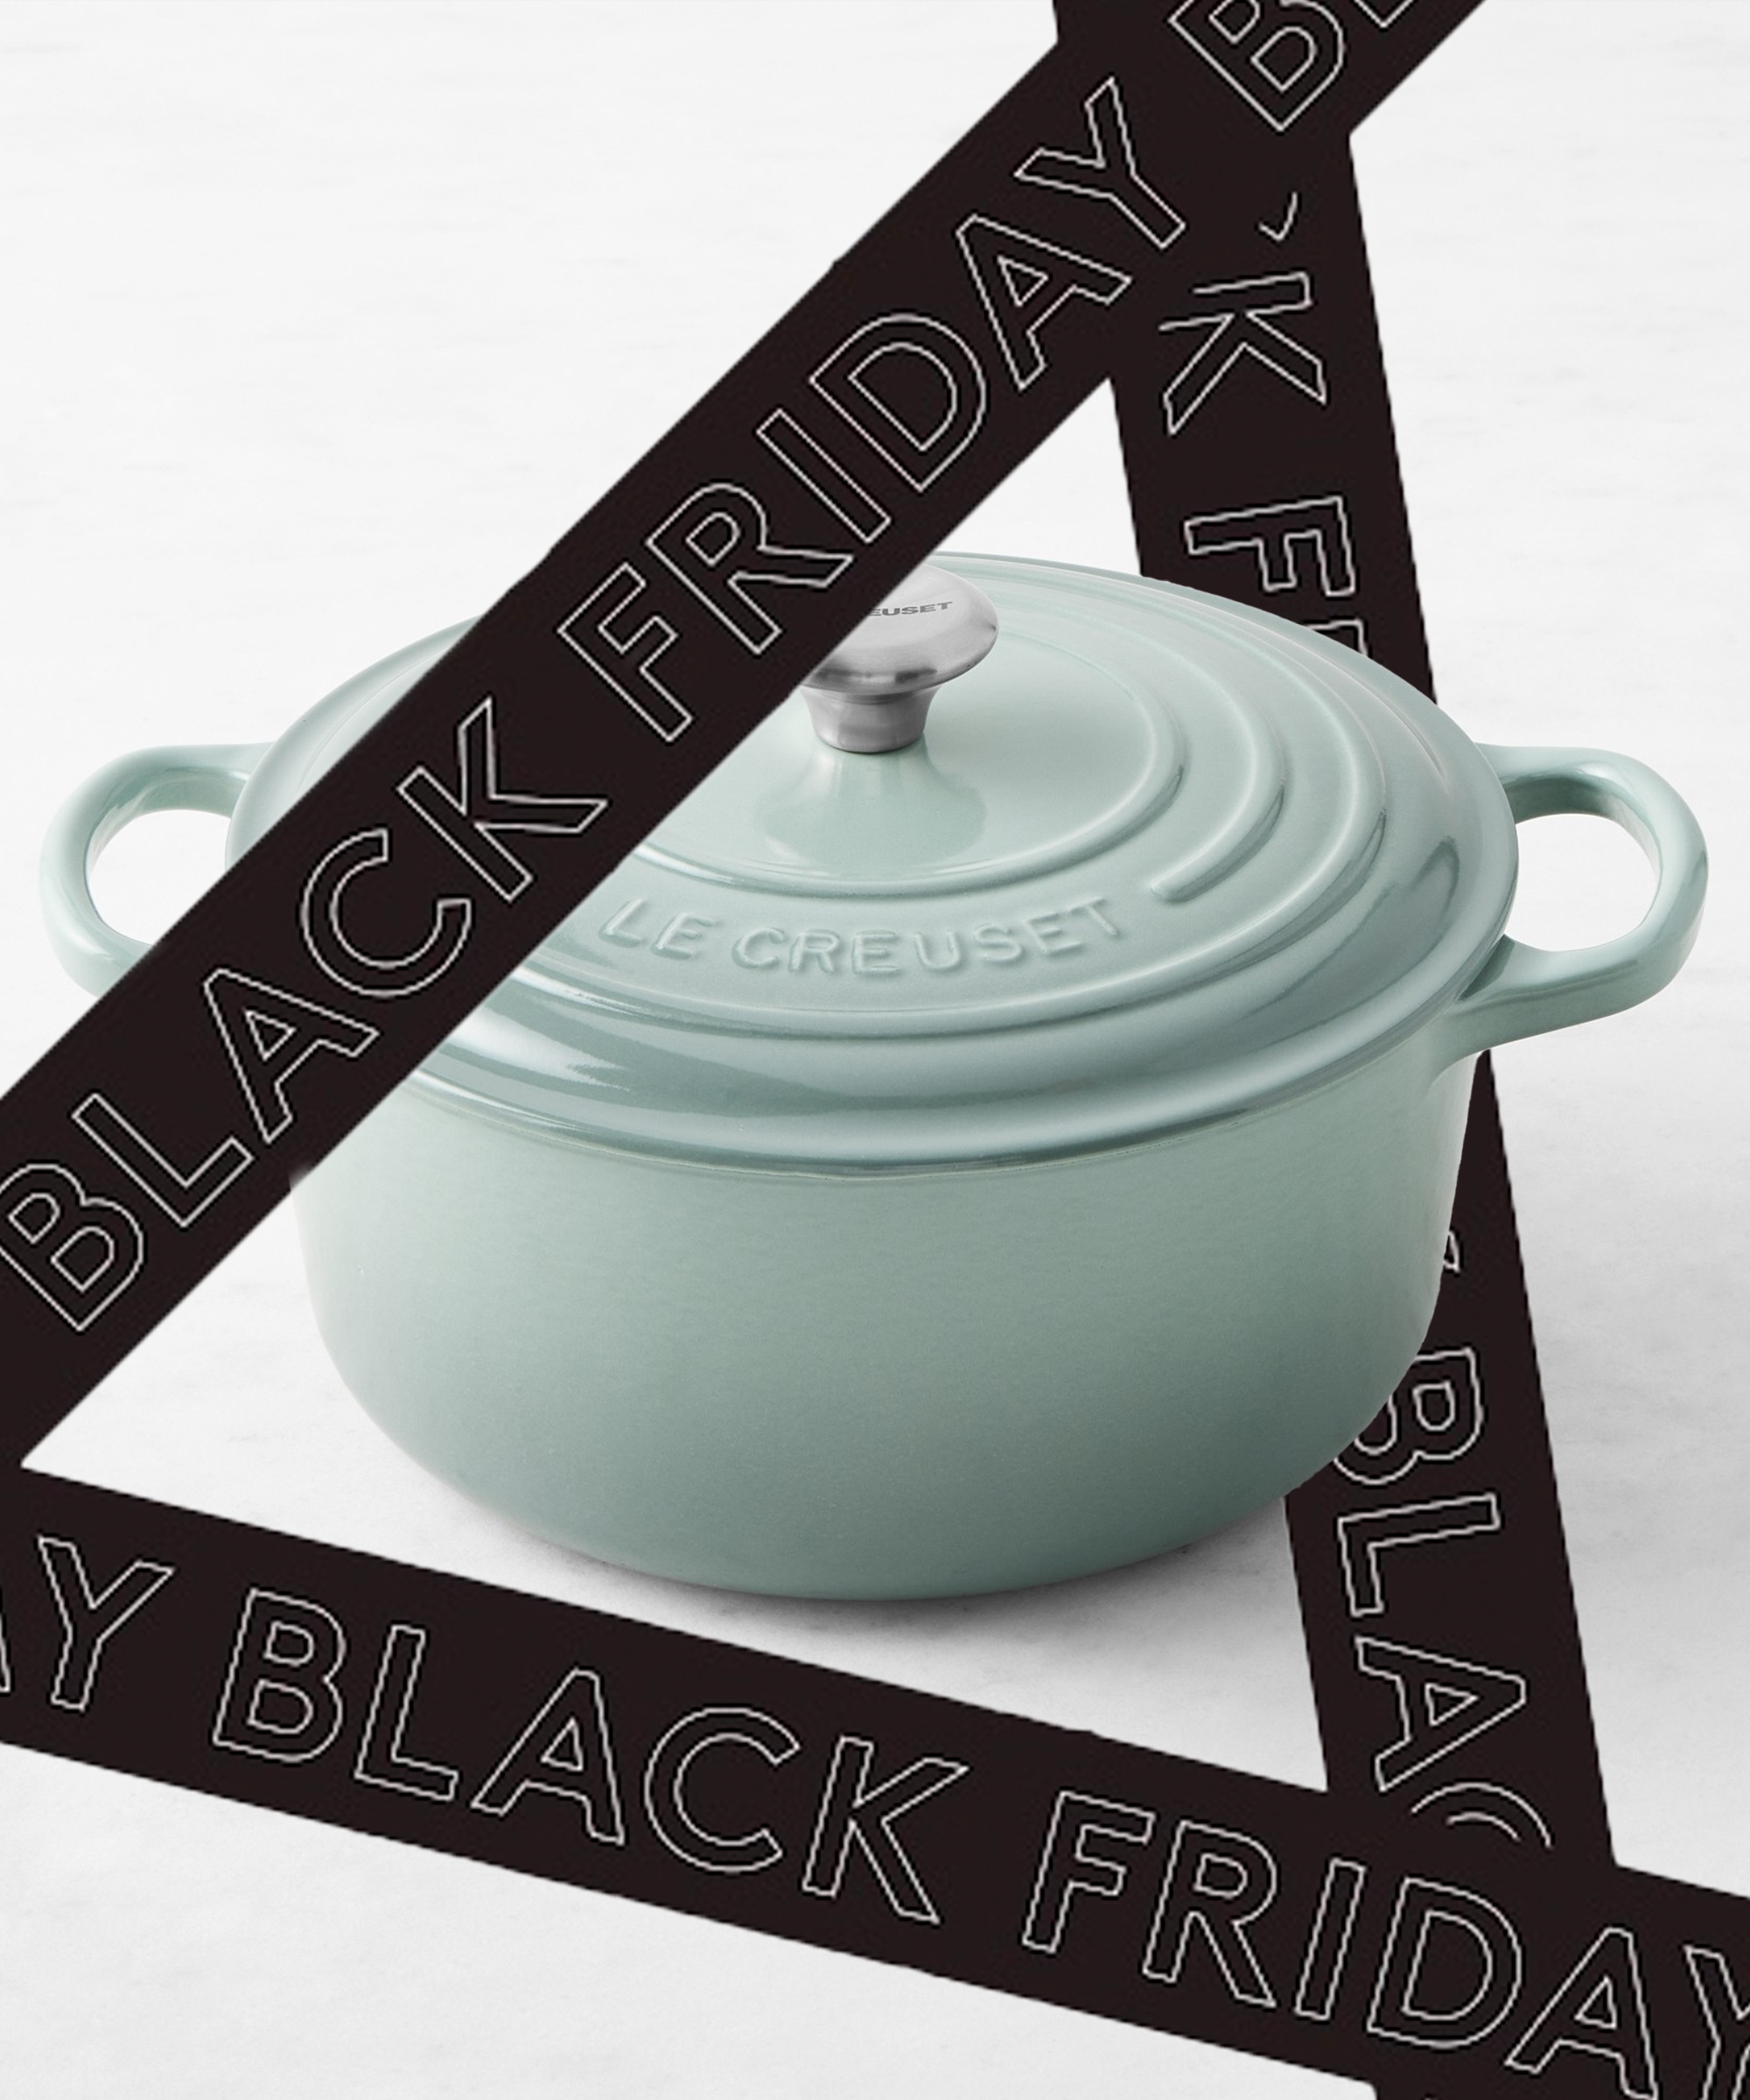 Caraway cookware deals: Save up to 20% at this early Black Friday